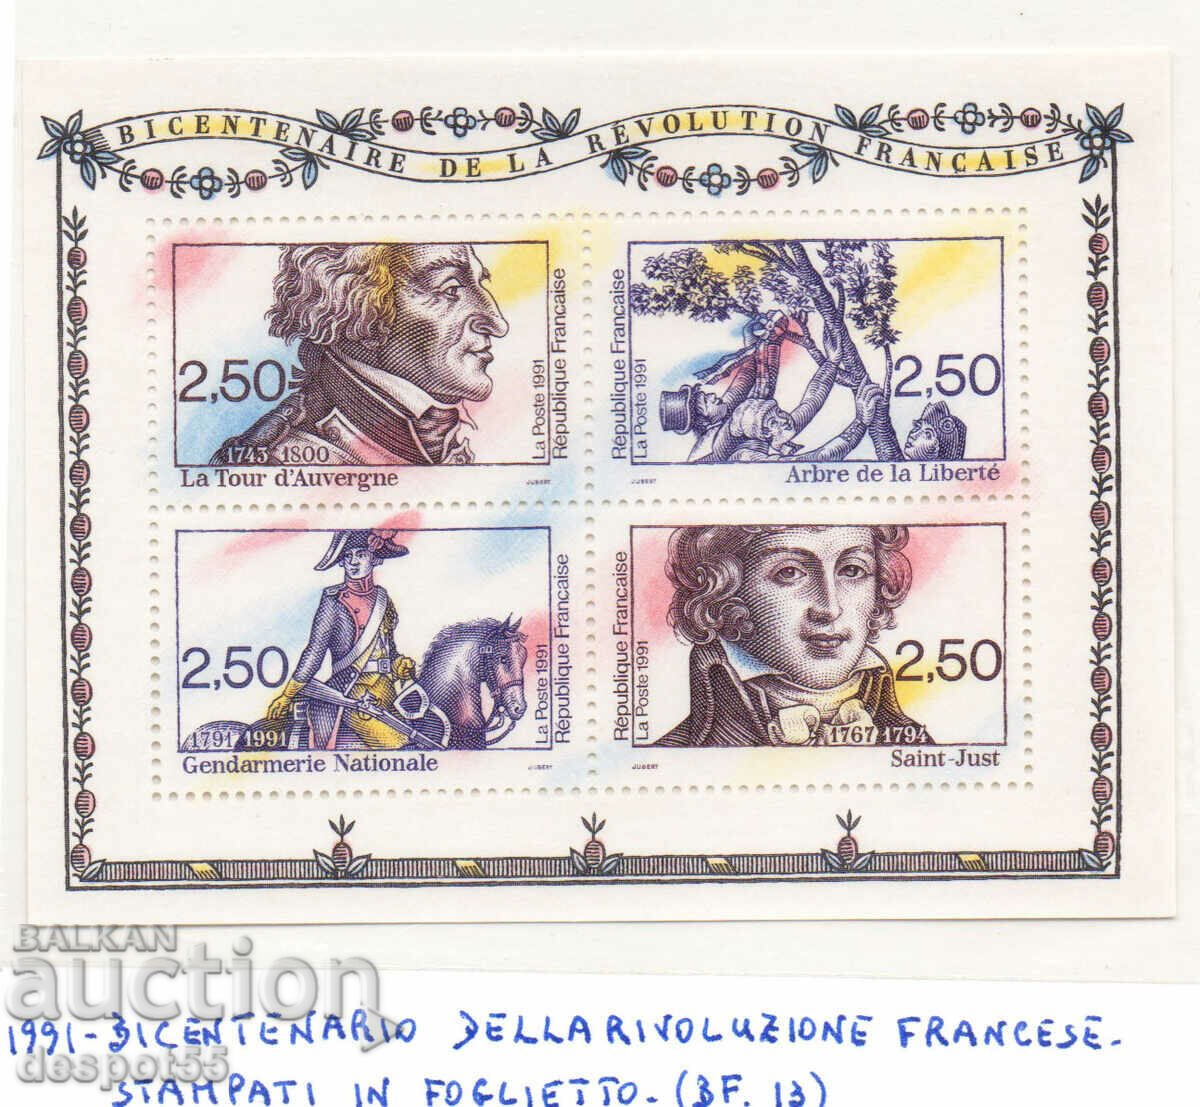 1991. France. The 200th anniversary of the French Revolution. Block.